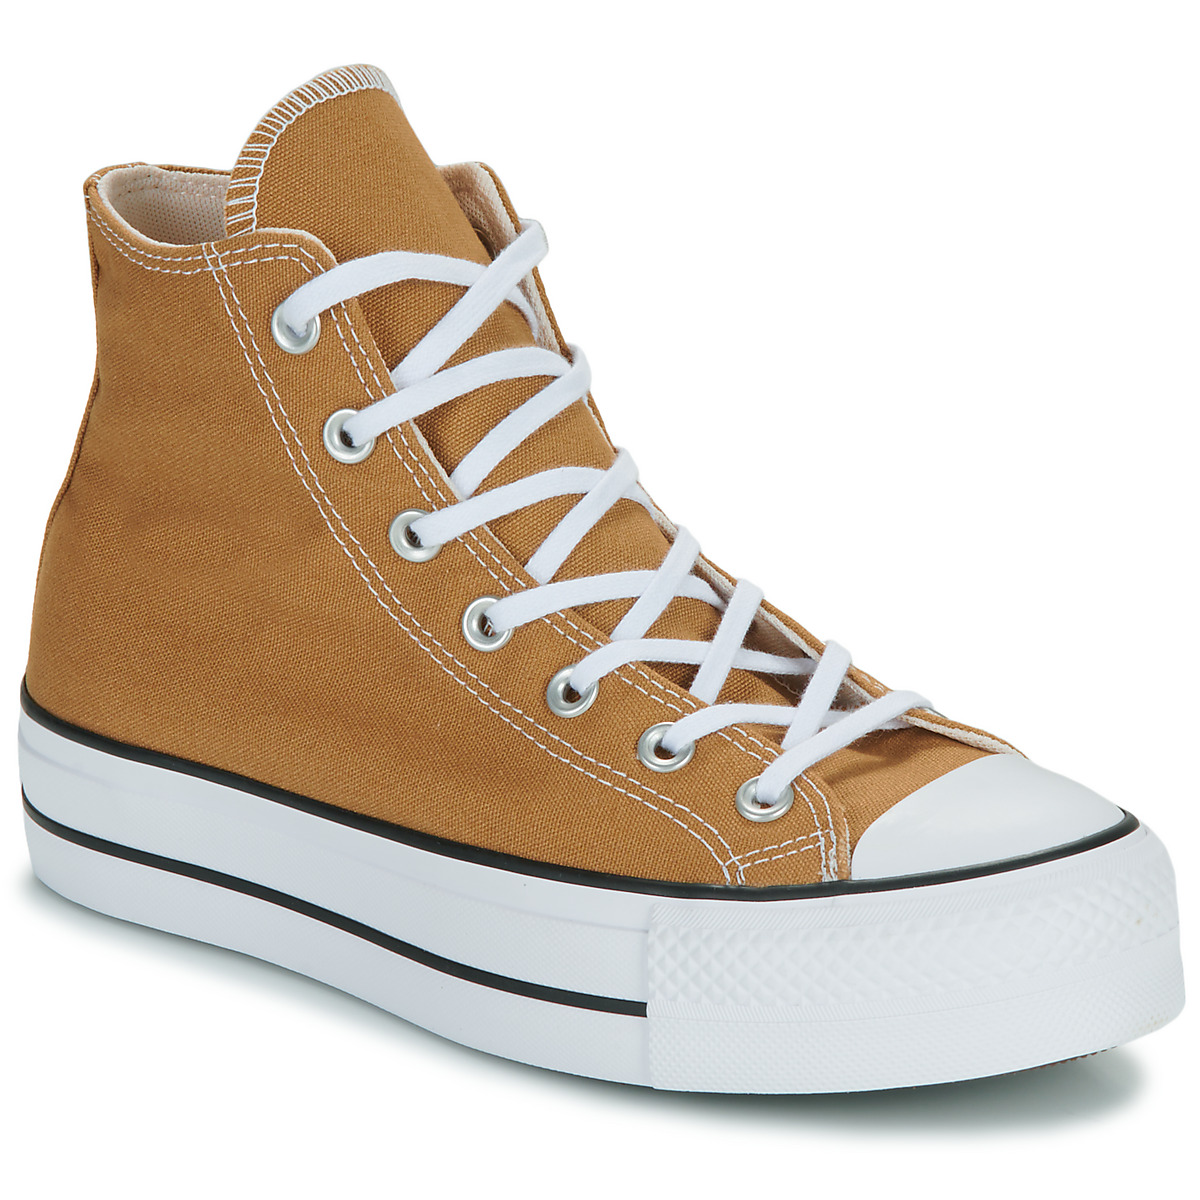 Chaussures Femme Converse and Slam Jam Create a 'Reconstructed' Chuck 70 CHUCK TAYLOR ALL STAR LIFT Beige